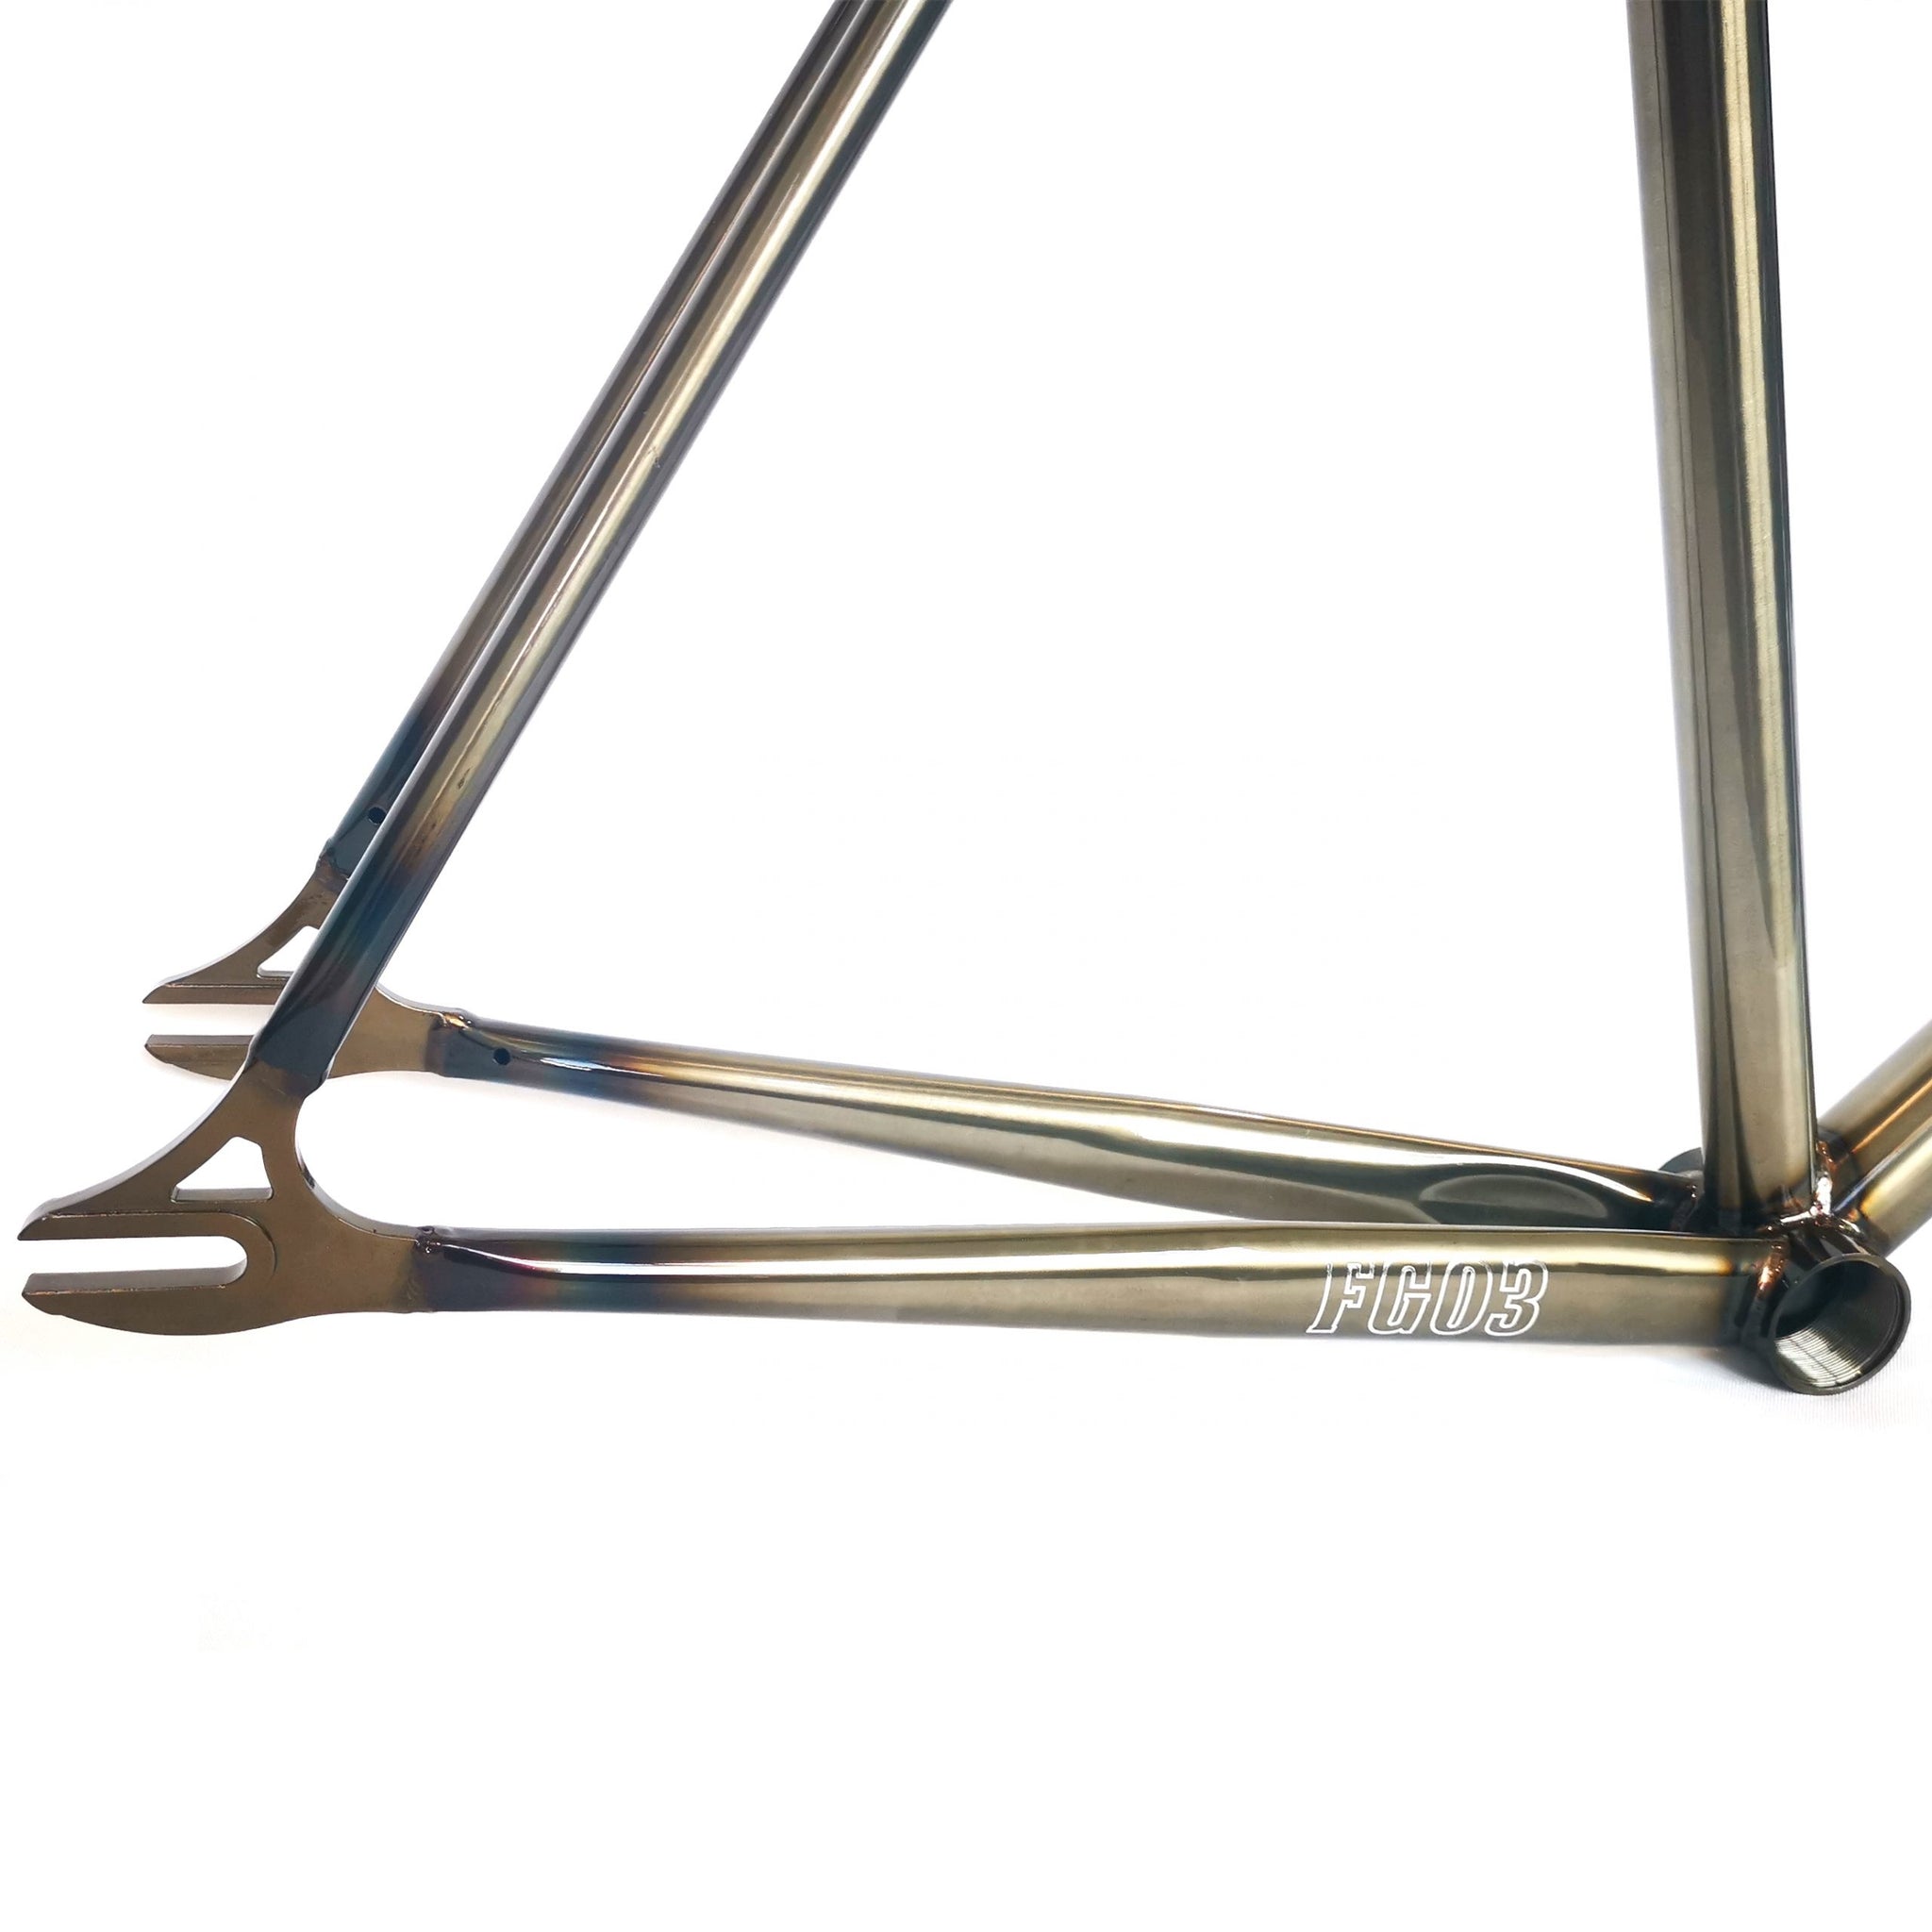 Seaboard FG03 Bicycle Frames 840.00 Atelier Olympia